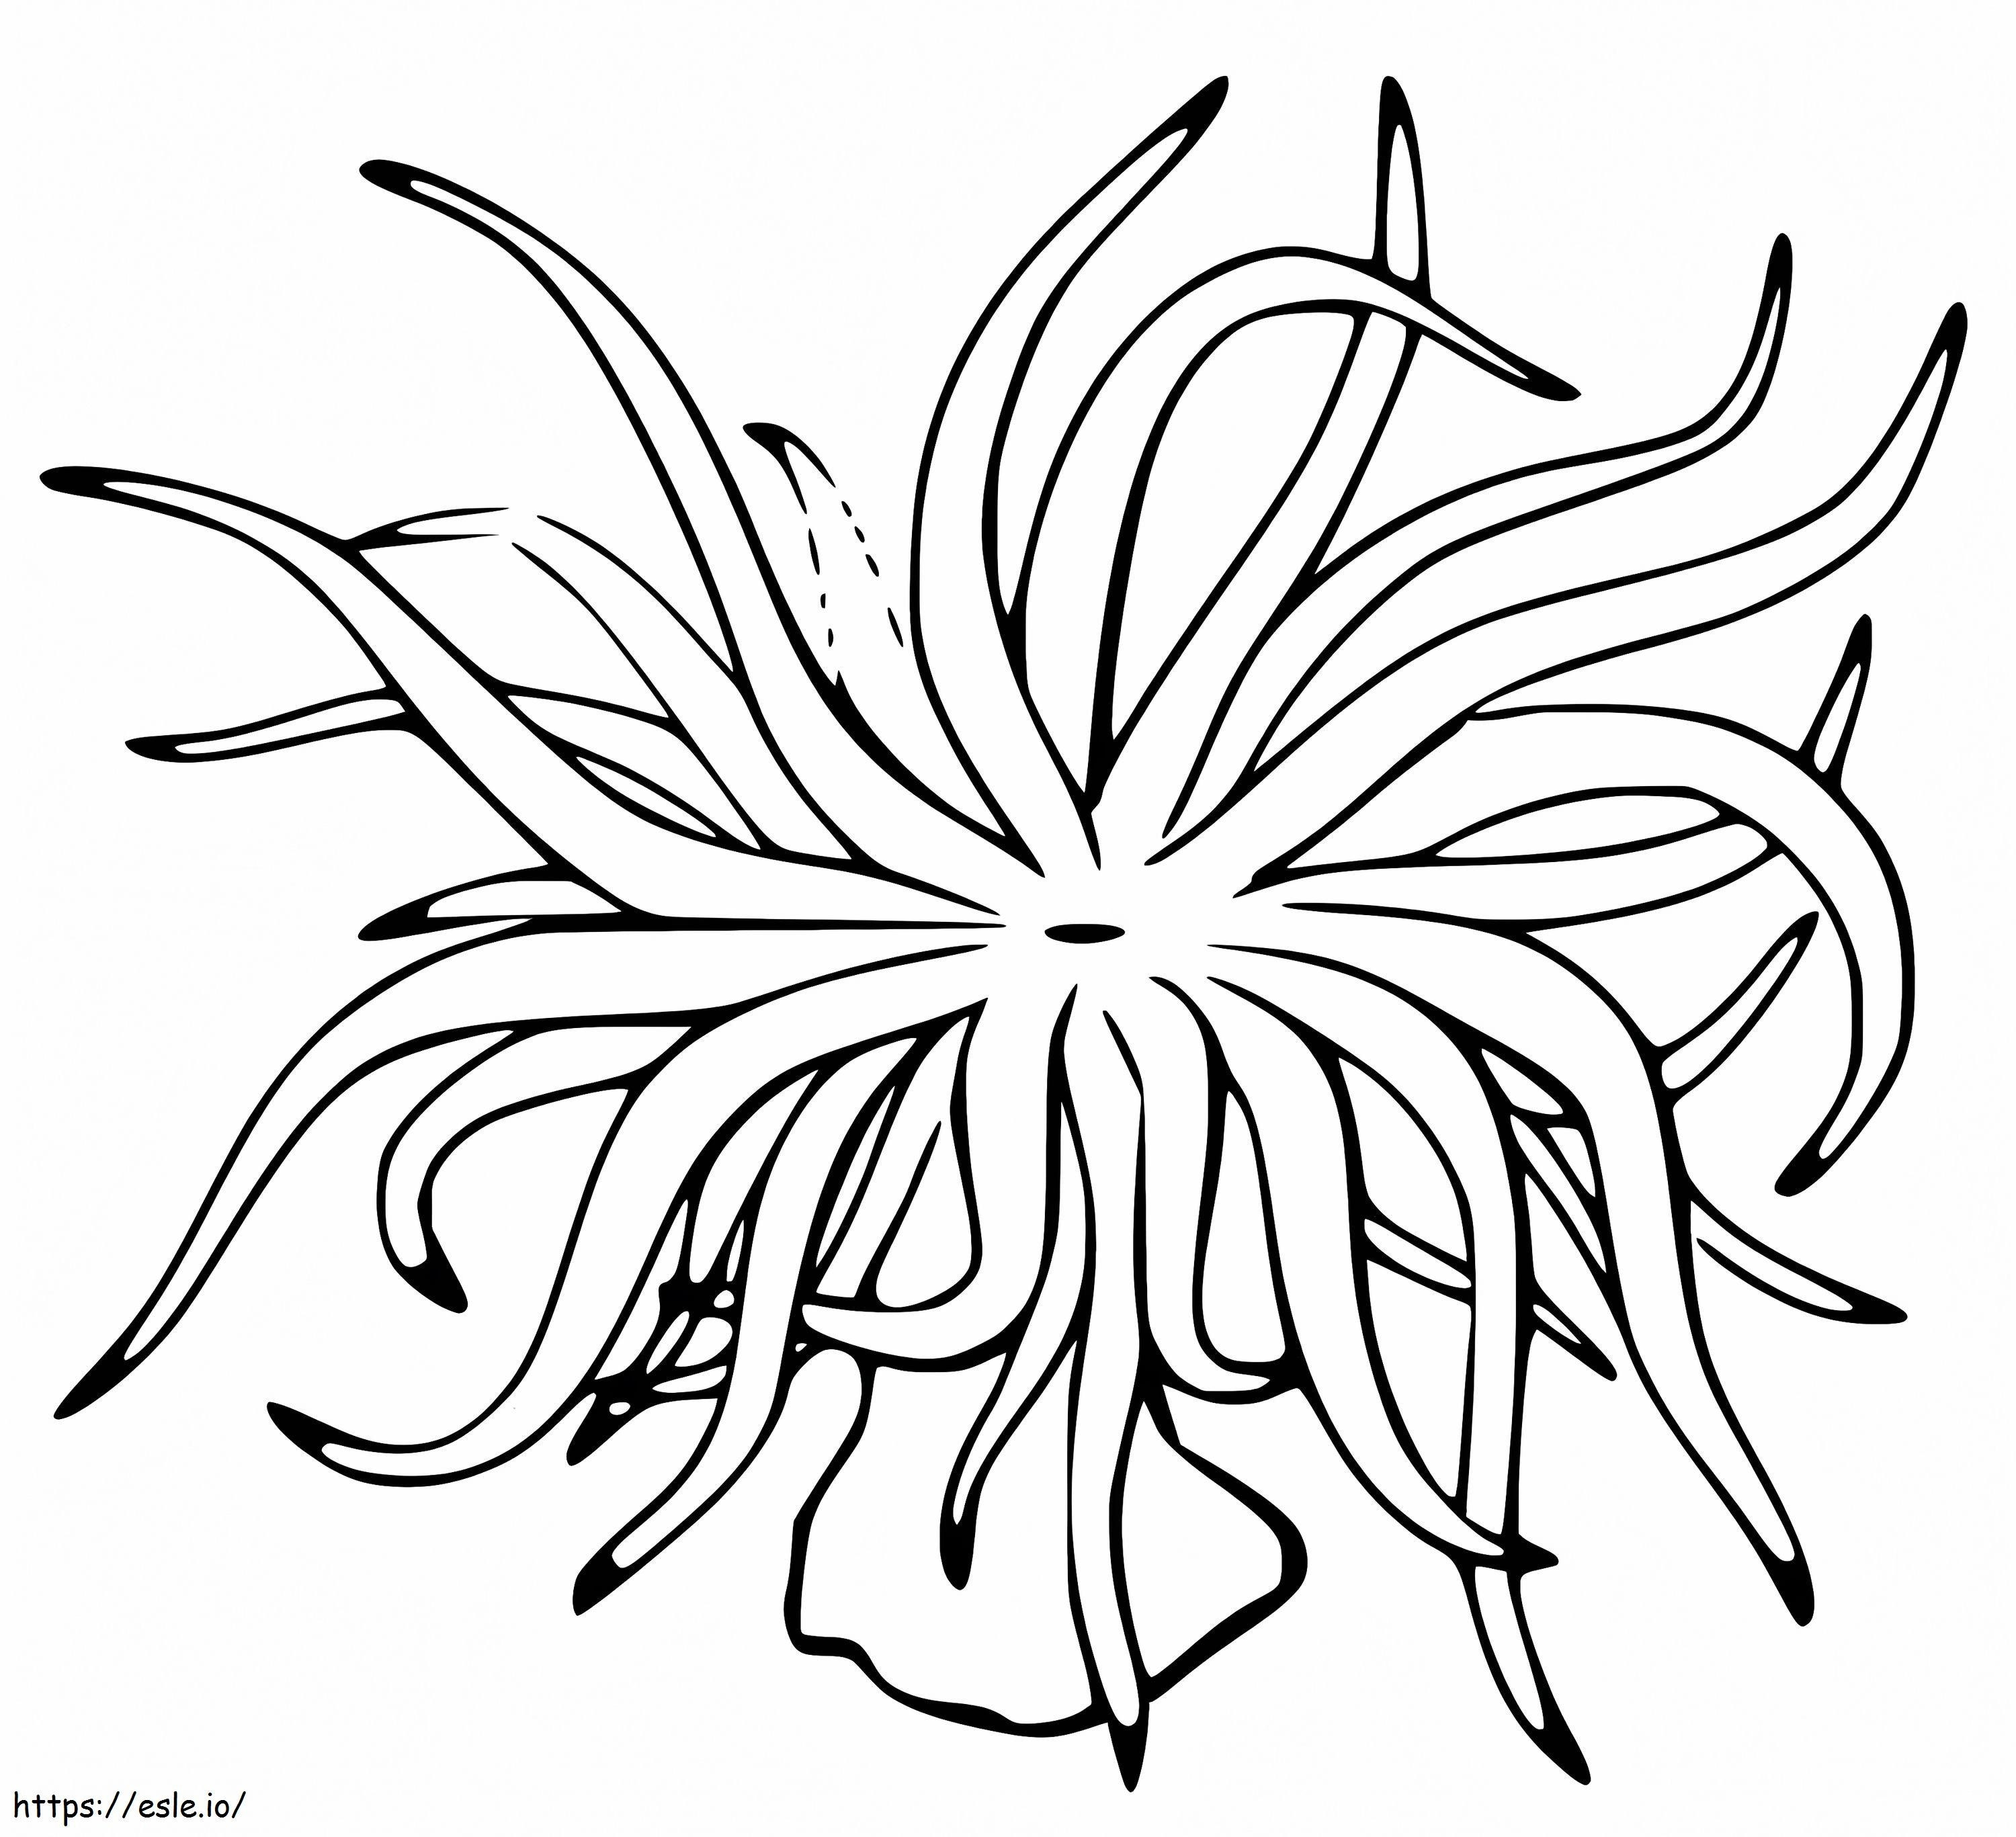 sea anemone coloring pages